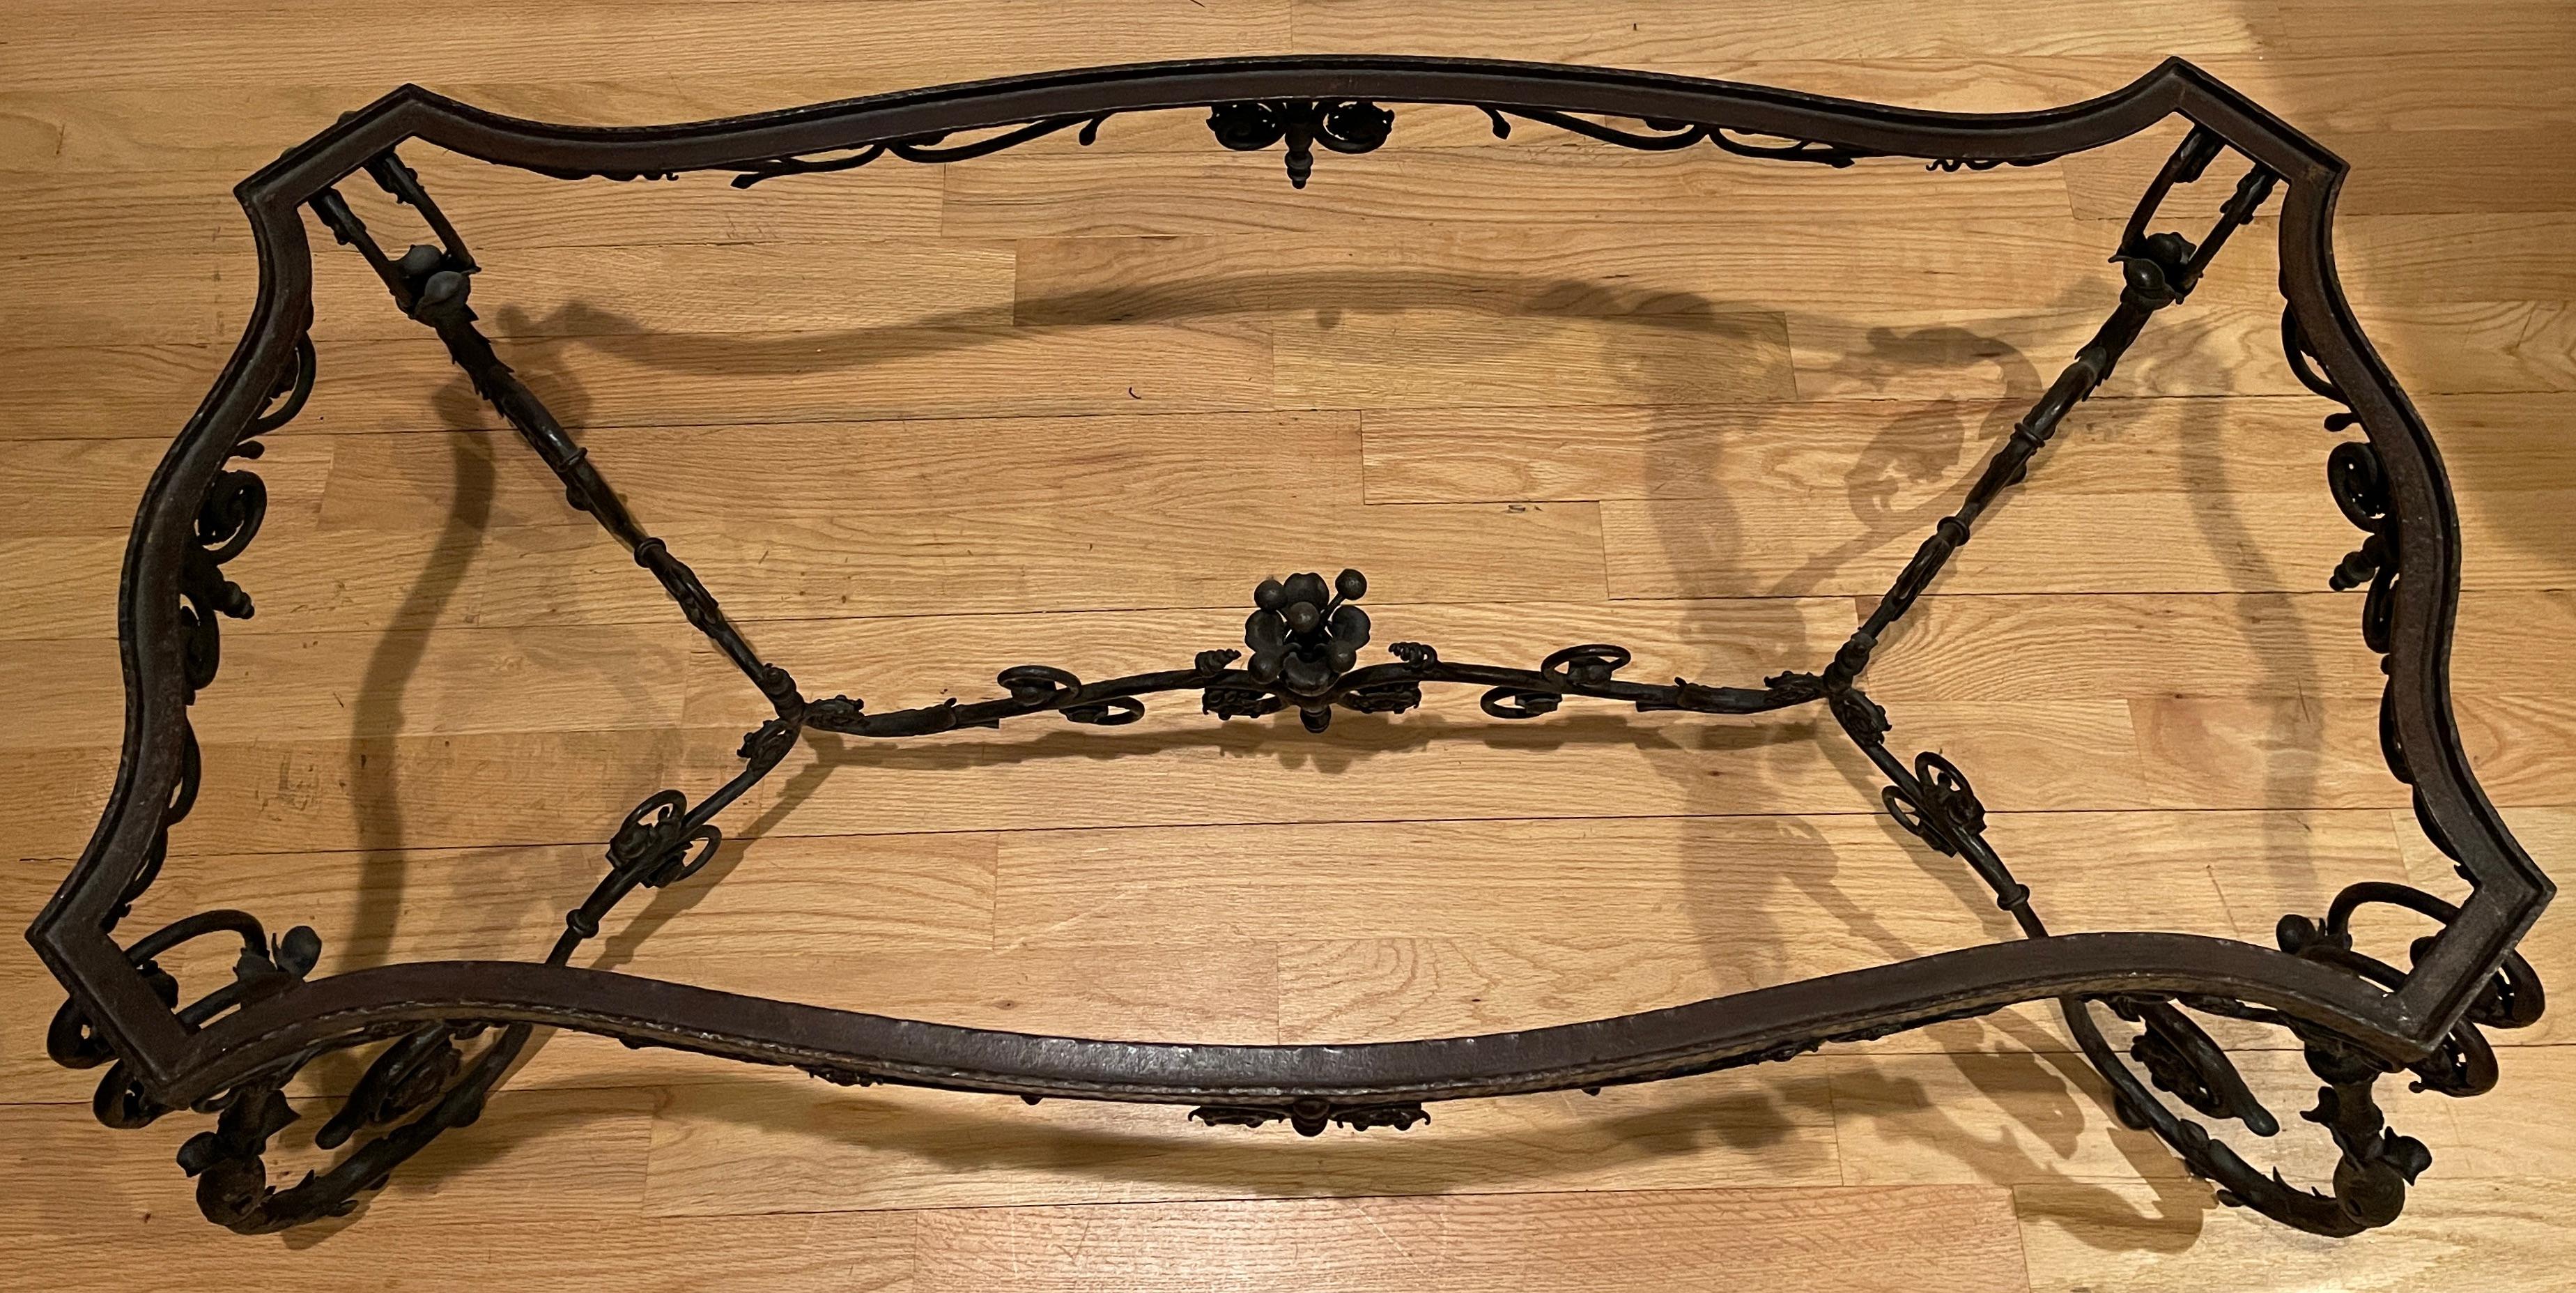 Rococo Revival Hand Wrought Iron Low Table For Sale